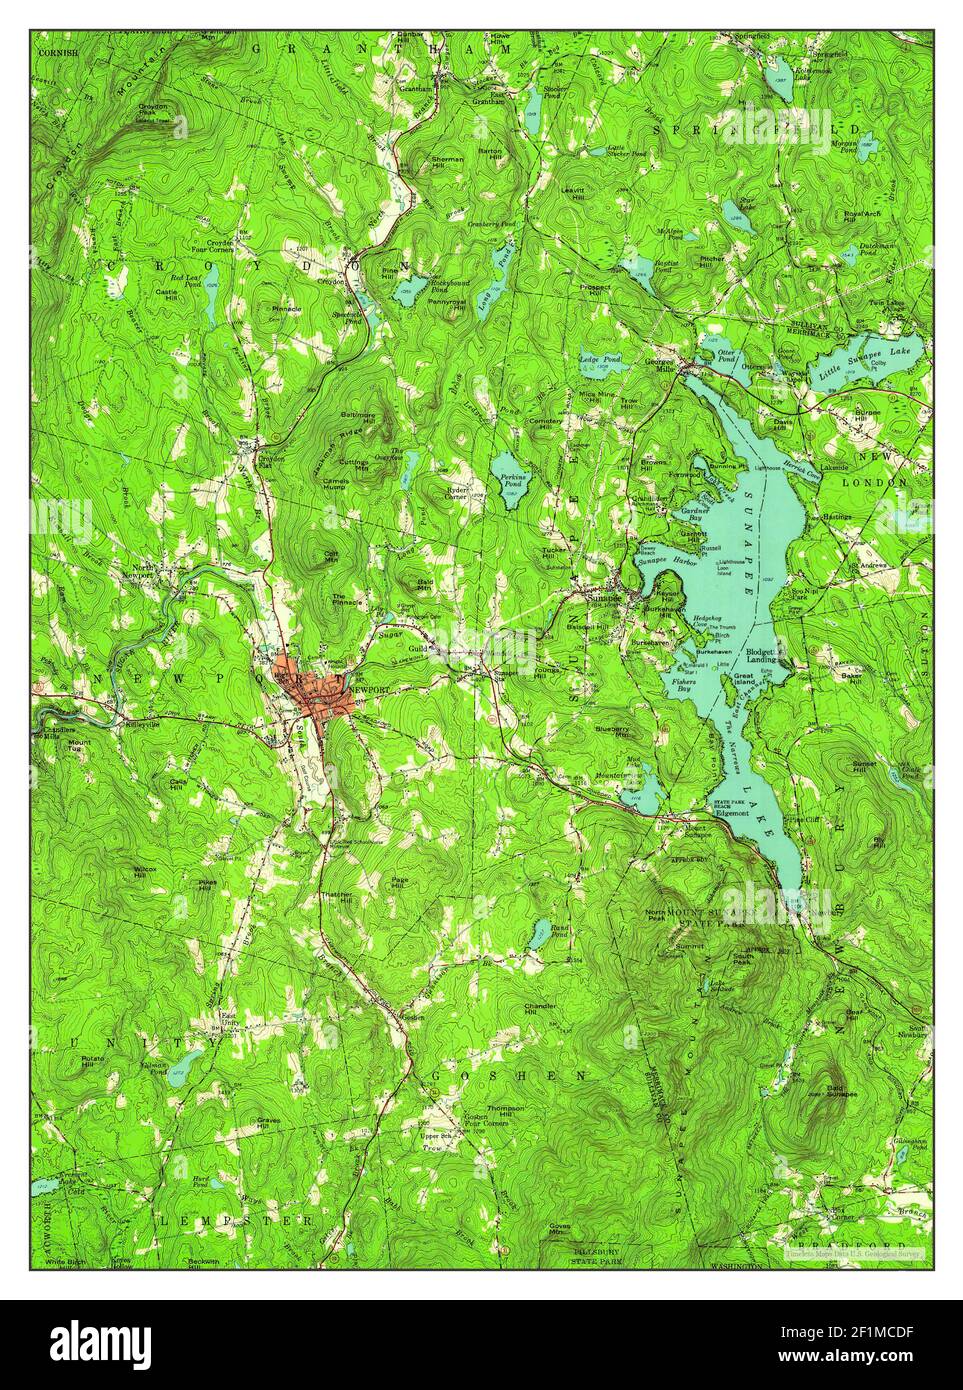 Sunapee, New Hampshire, map 1955, 1:62500, United States of America by Timeless Maps, data U.S. Geological Survey Stock Photo